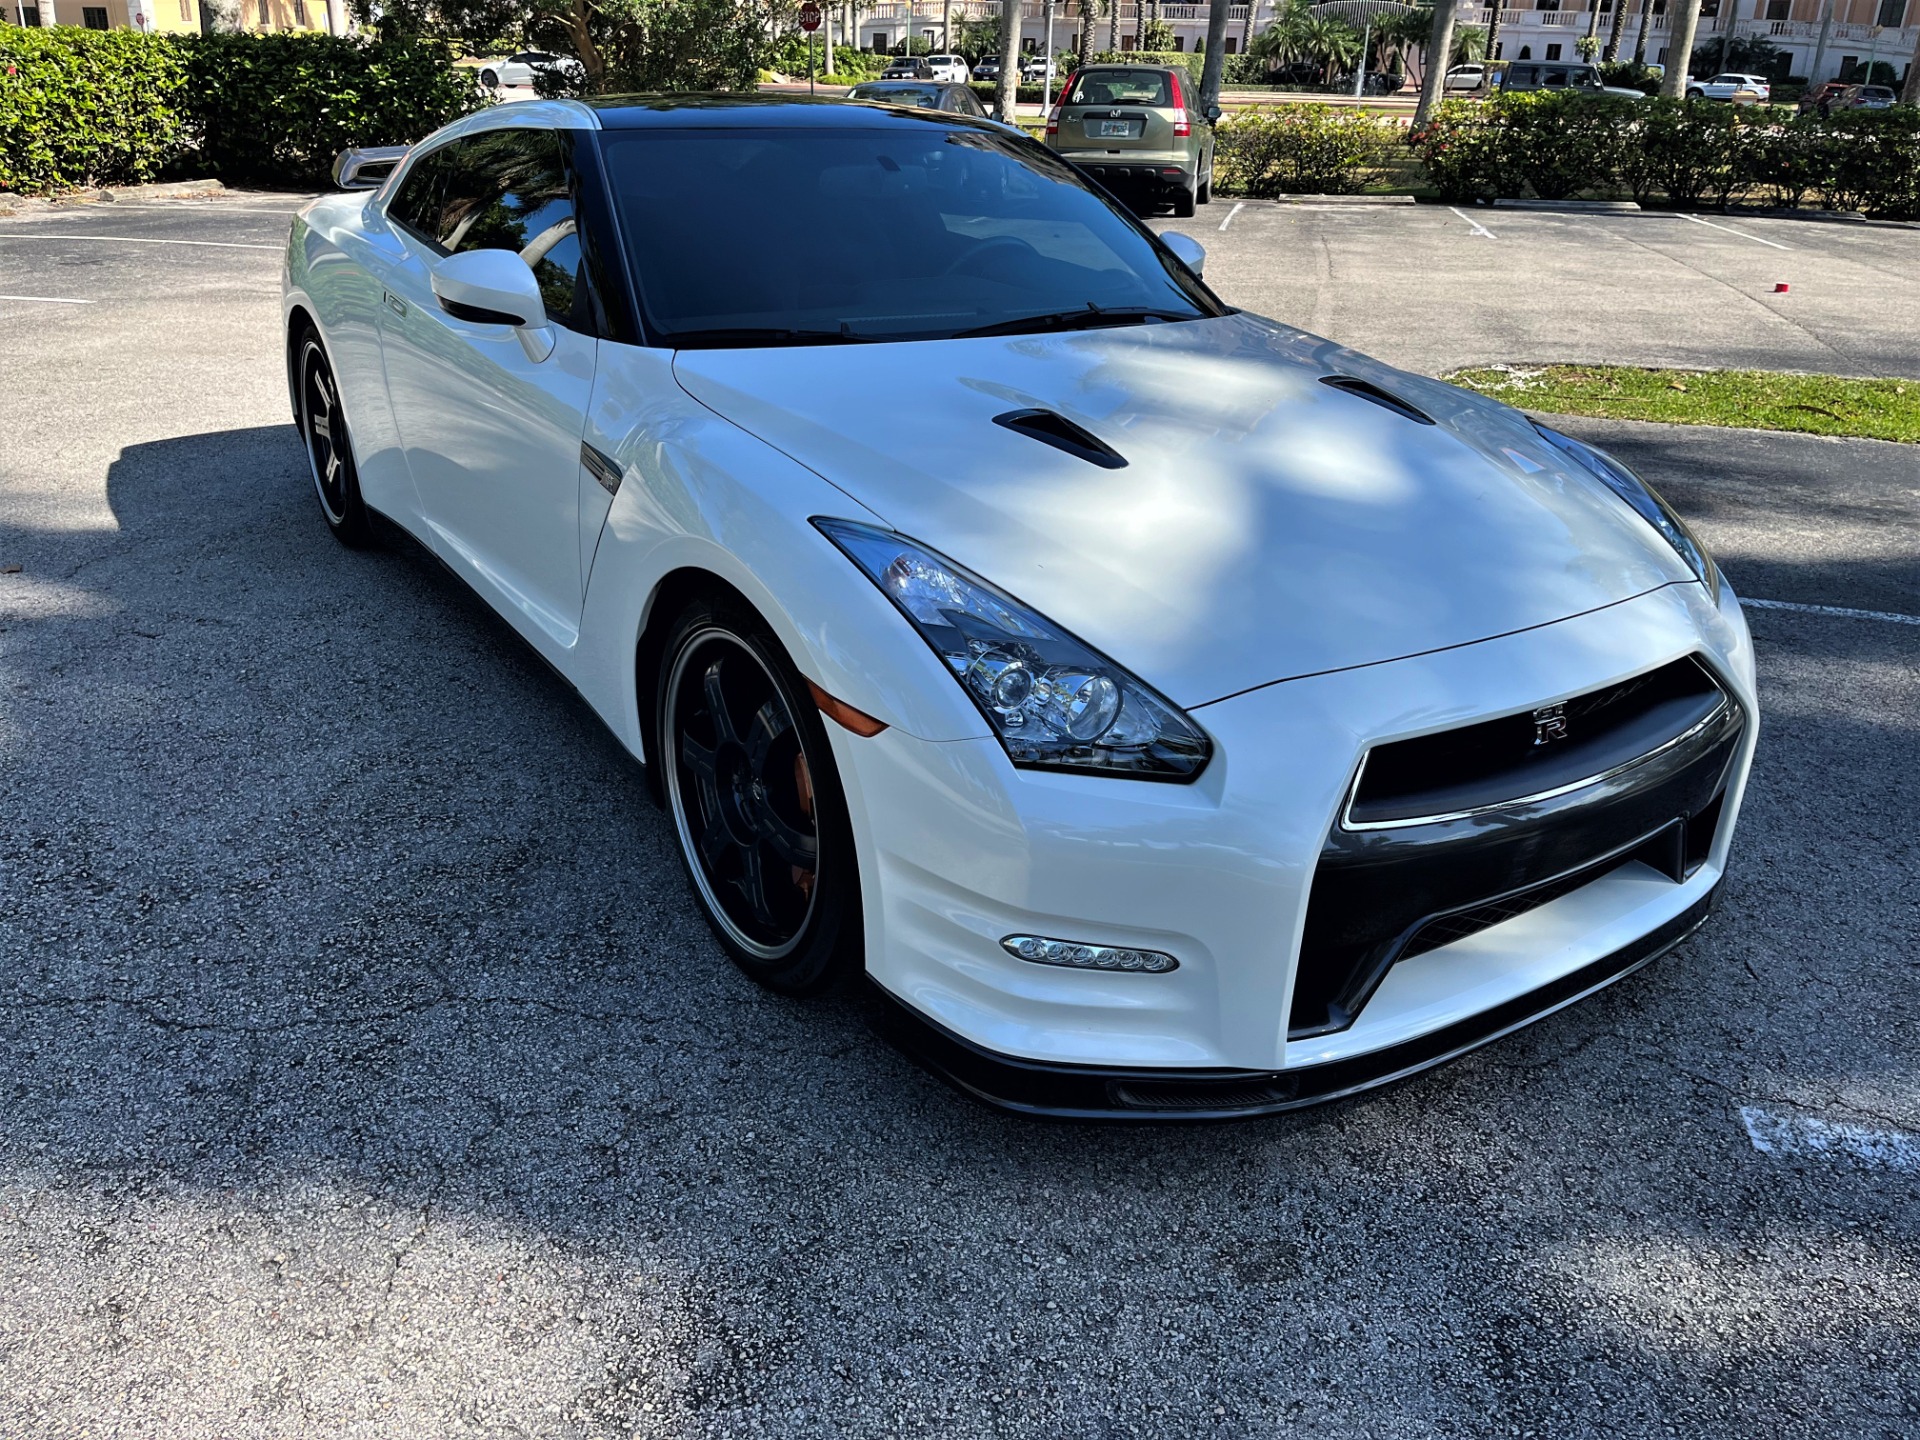 Used 2014 Nissan GT-R Track Edition for sale $109,850 at The Gables Sports Cars in Miami FL 33146 4